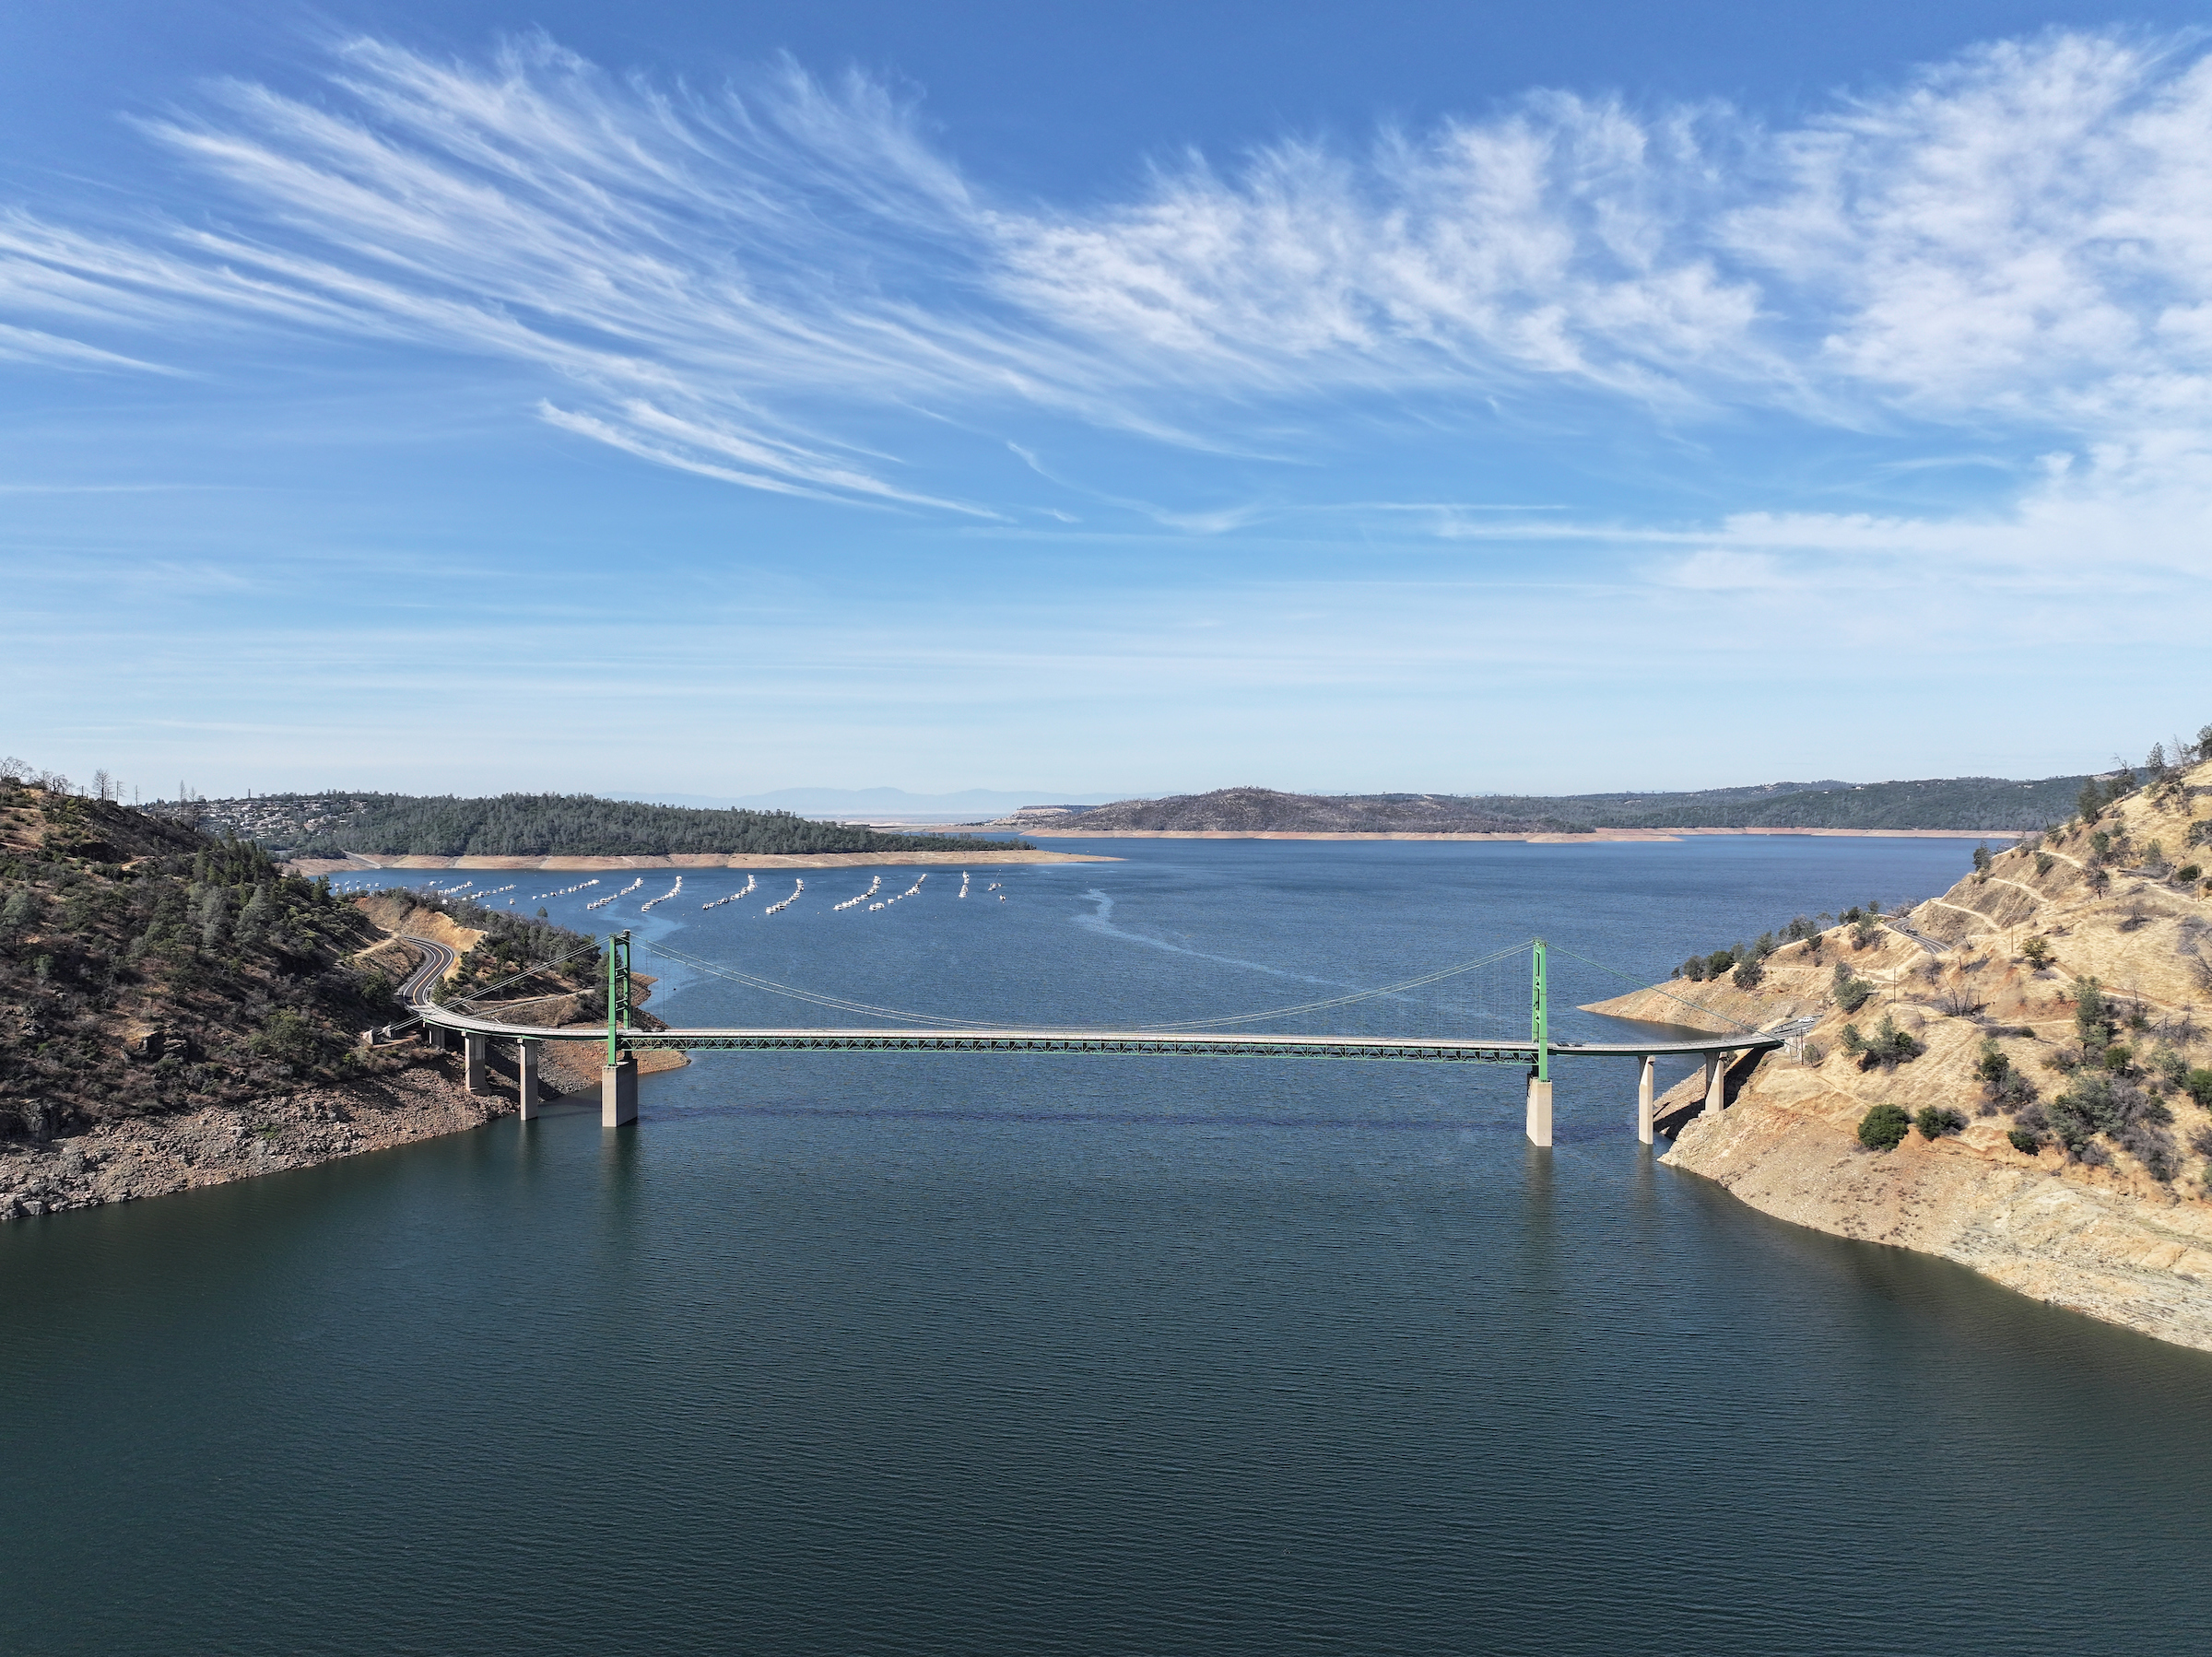 The Feather River Bridge in Oroville, California. Photo taken October 2, 2023.